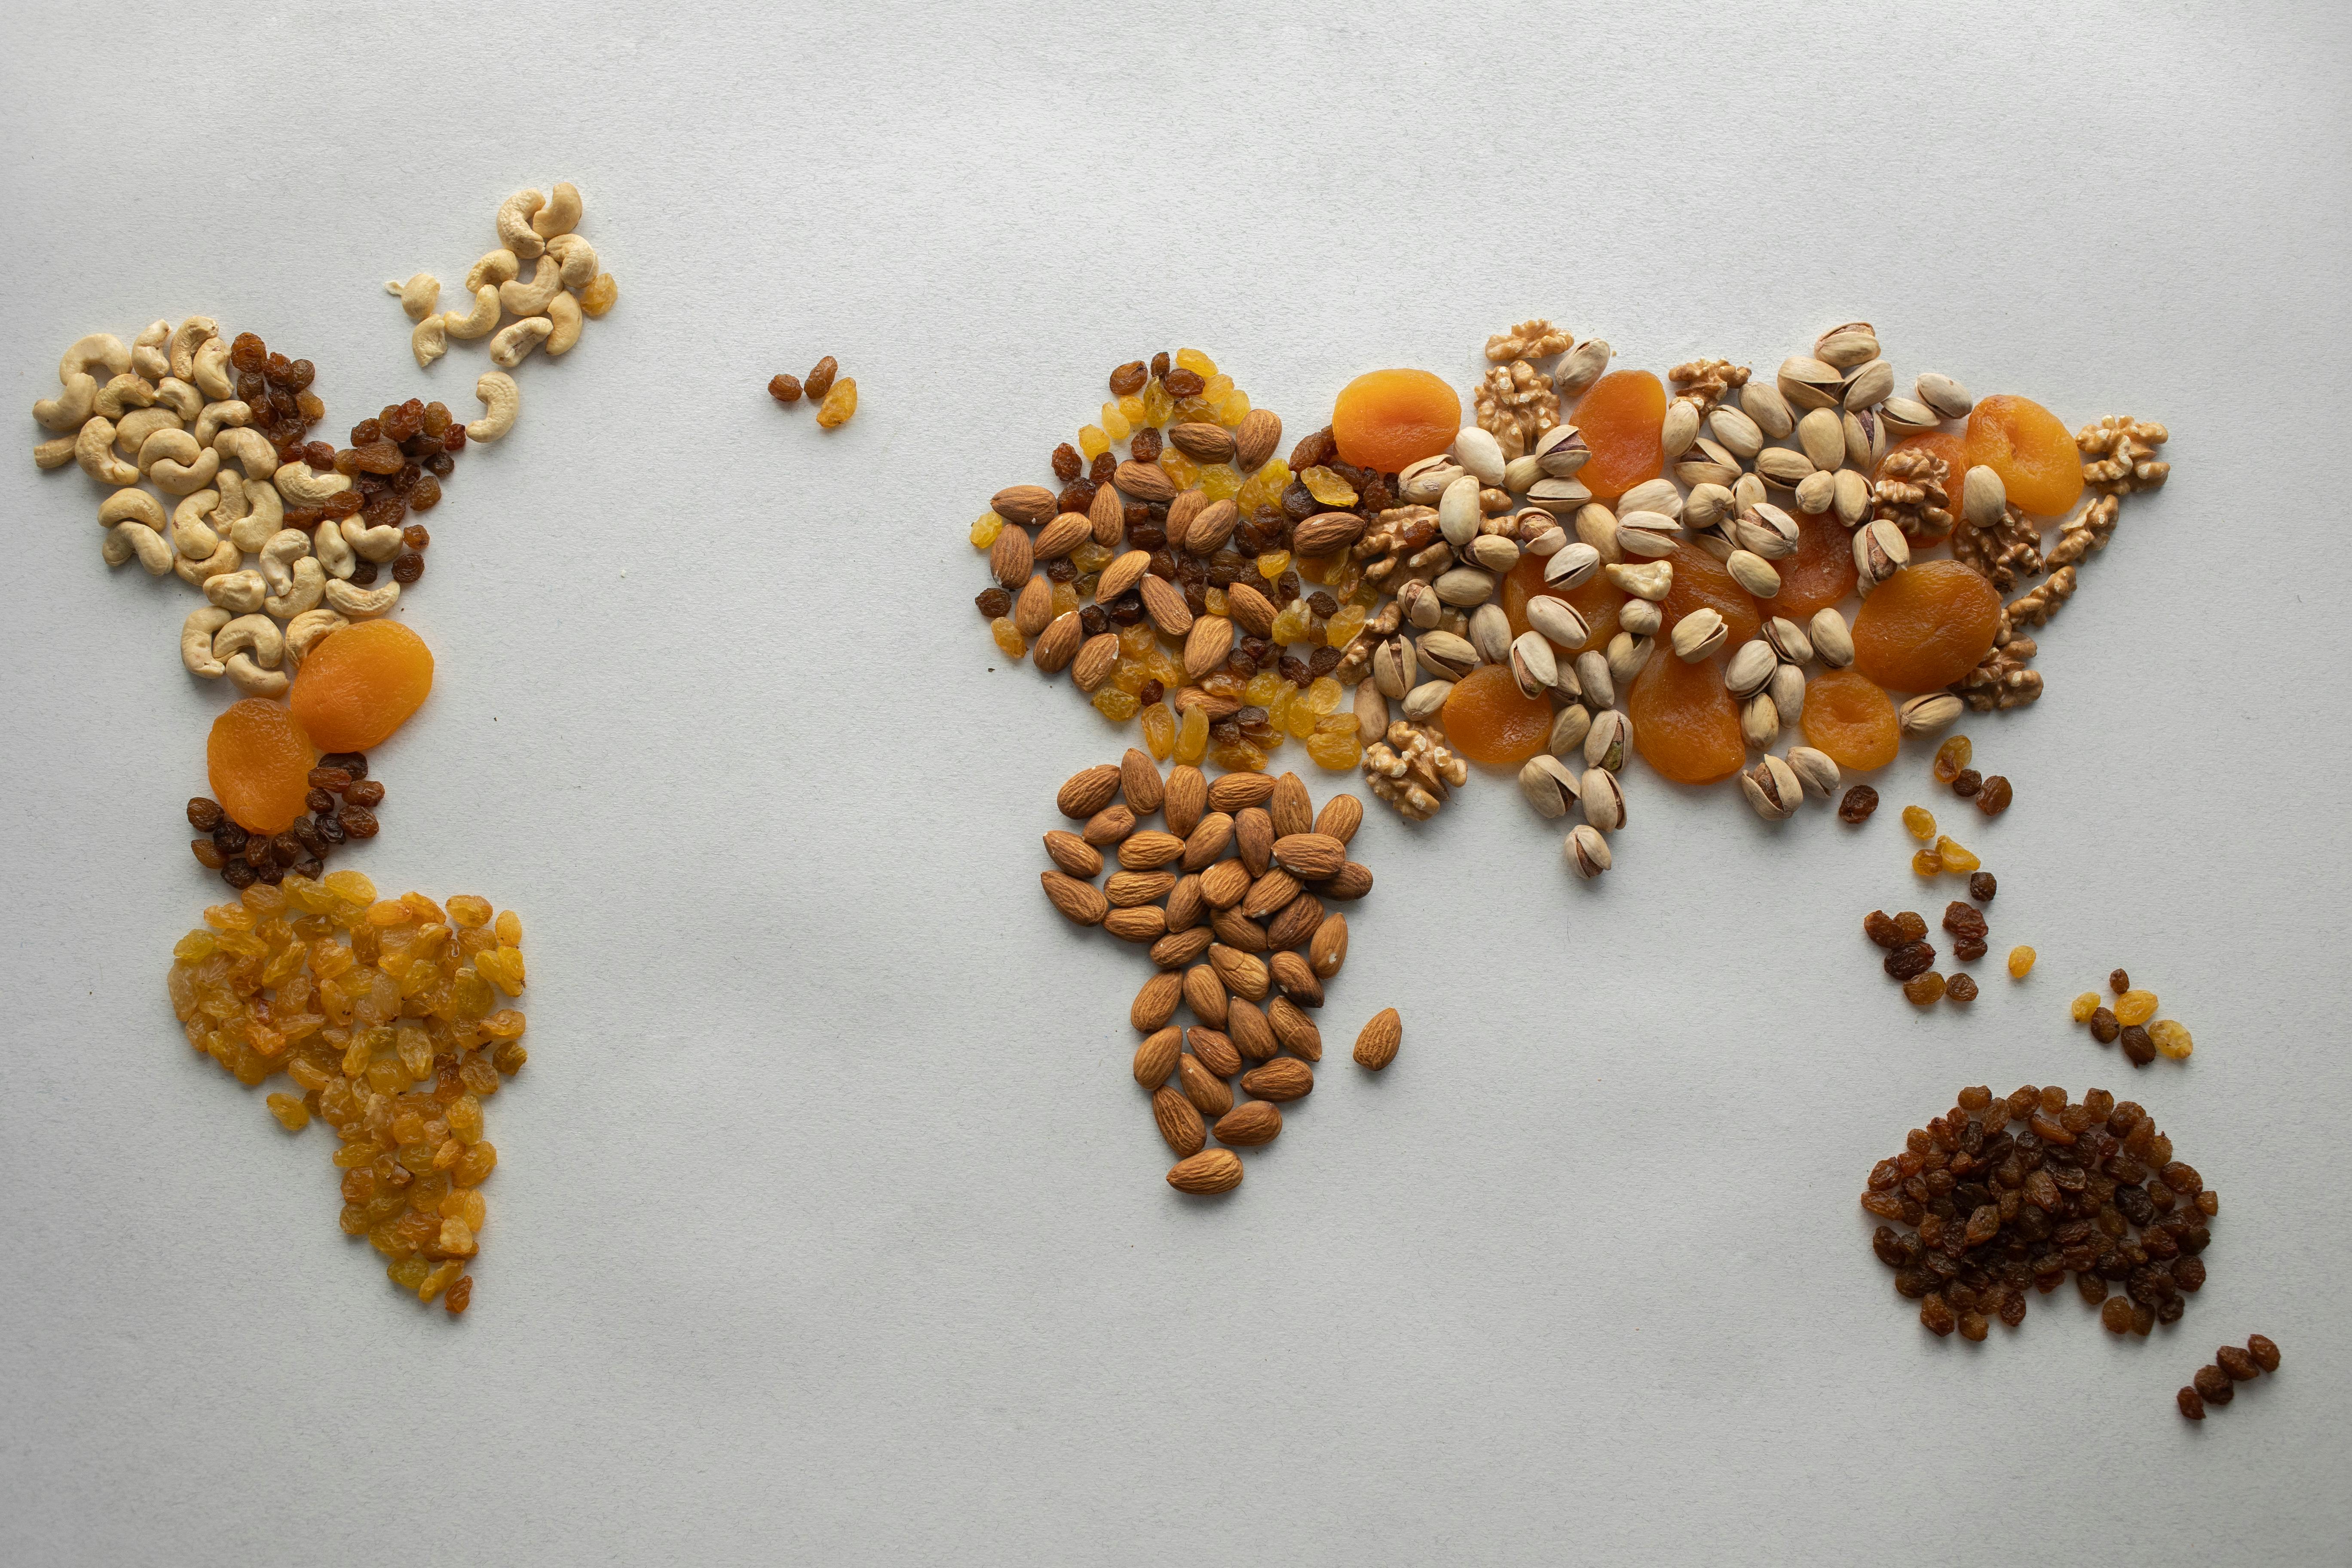 world map made of nuts and dried fruits